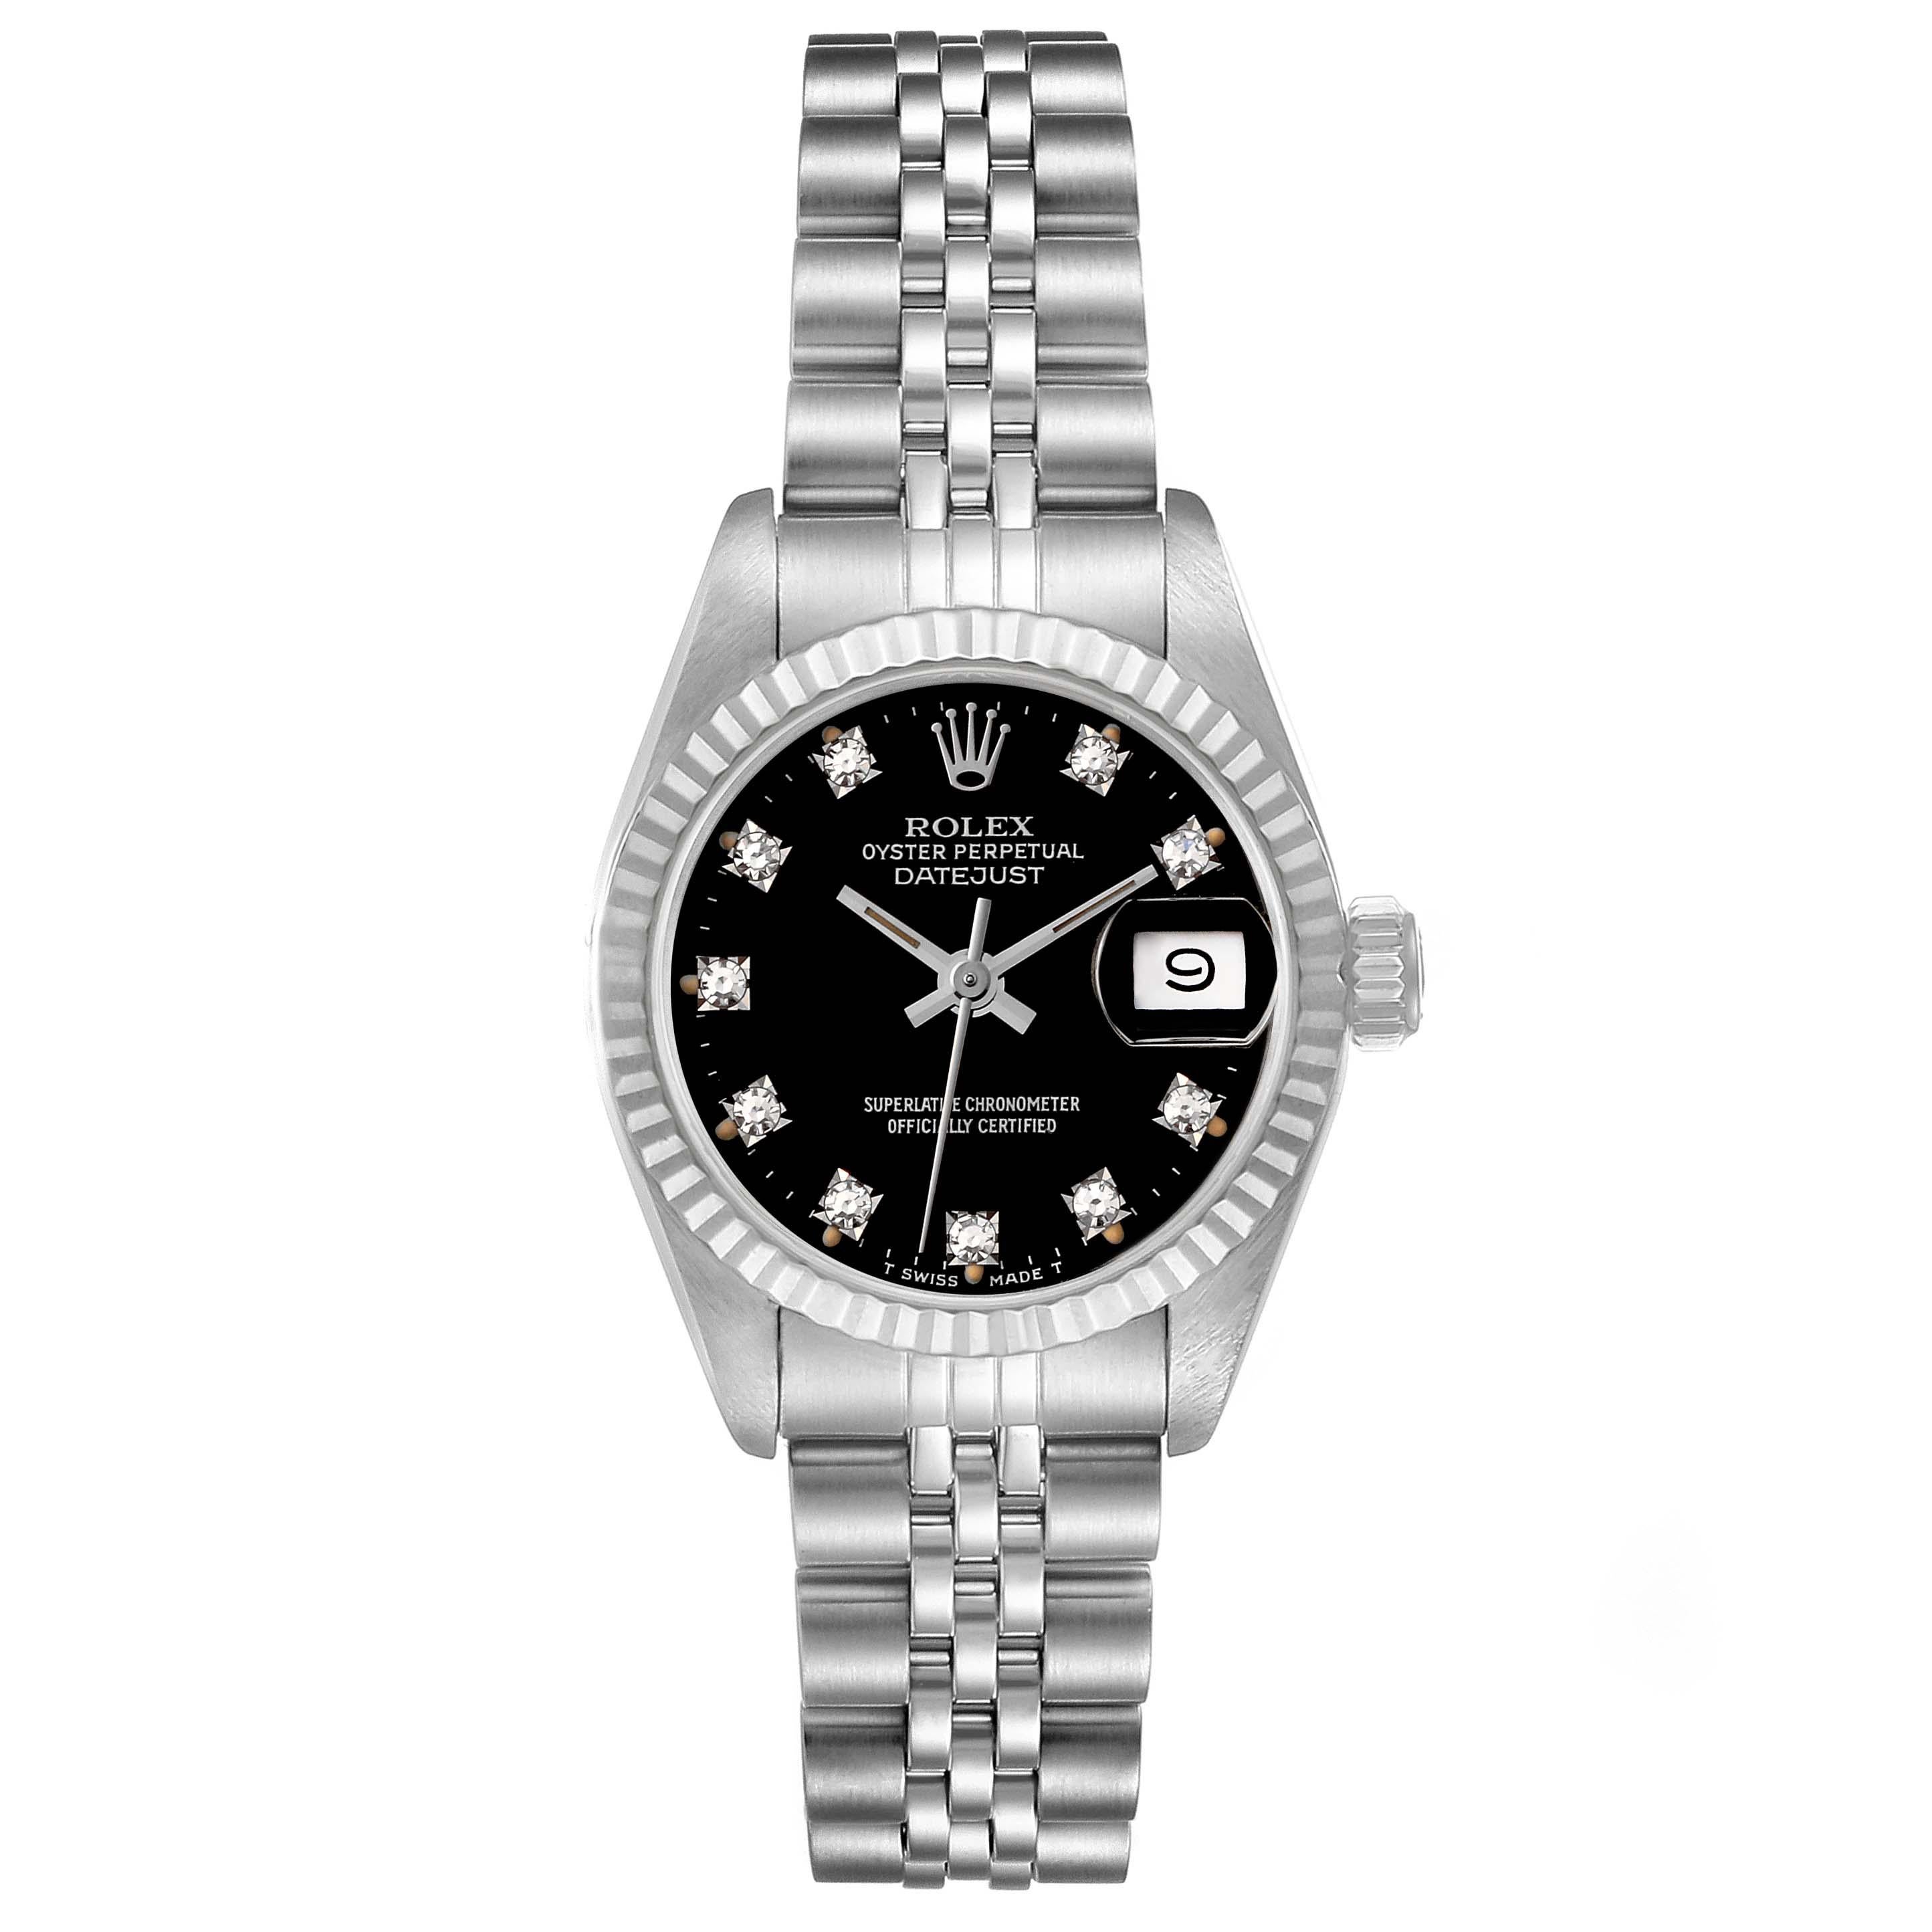 Rolex Datejust Steel White Gold Black Diamond Dial Ladies Watch 69174 Box Papers. Officially certified chronometer automatic self-winding movement. Stainless steel oyster case 26.0 mm in diameter. Rolex logo on a crown. 18k white gold fluted bezel.